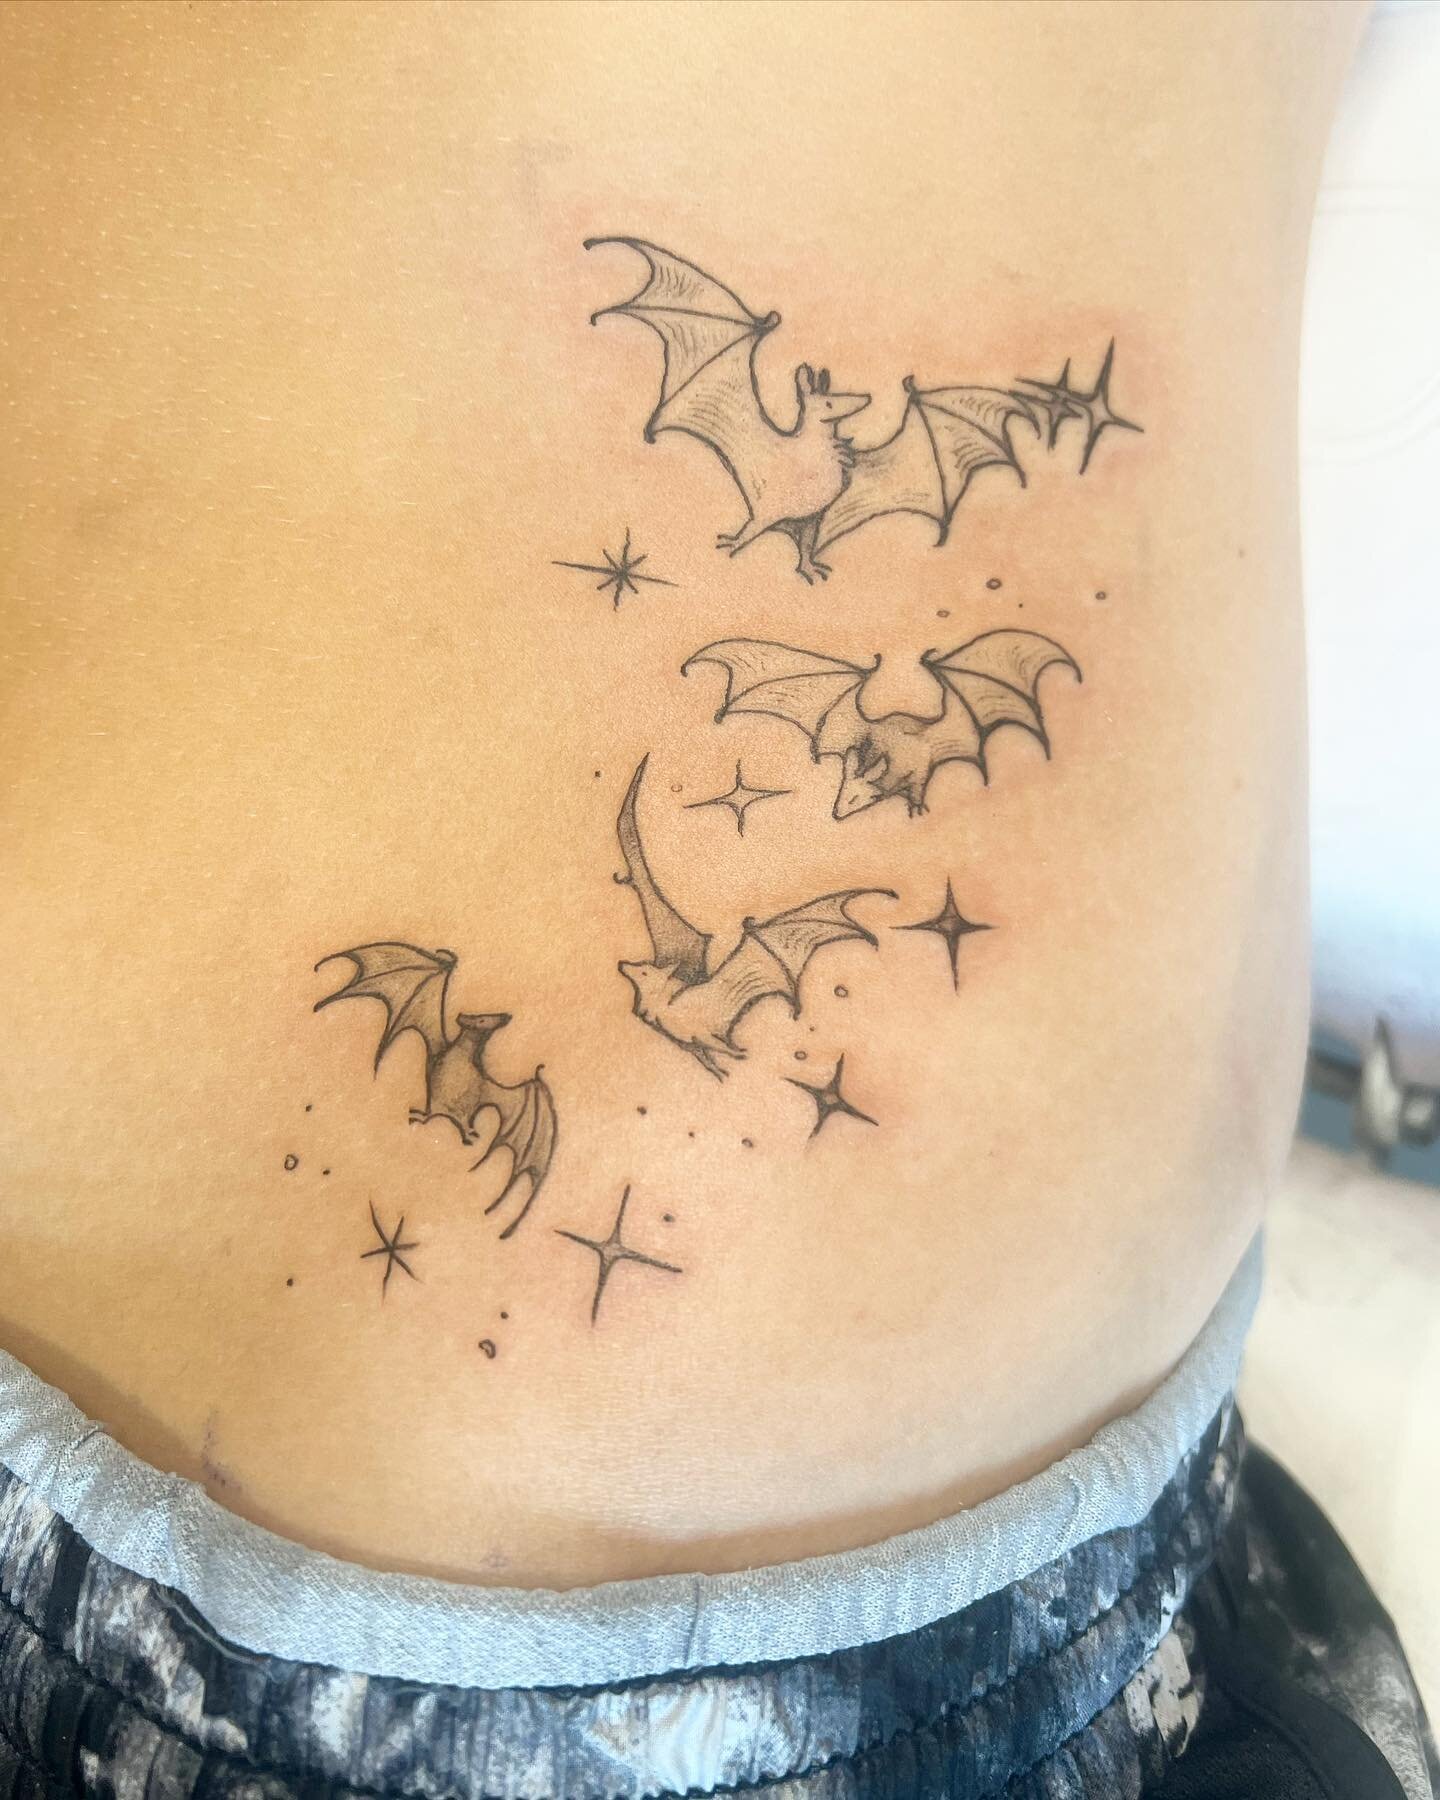 Thank you @abigailhlowder and @ben_dwol07 for trusting me with these designs!! 🦇✨🎶🎵

Booking is open for September- You can find the tattoo form in the link in my bio!
#tattoo #hudsonvalley #woodstock #woodstocktattoo #eddempseytattoo #bats #anima